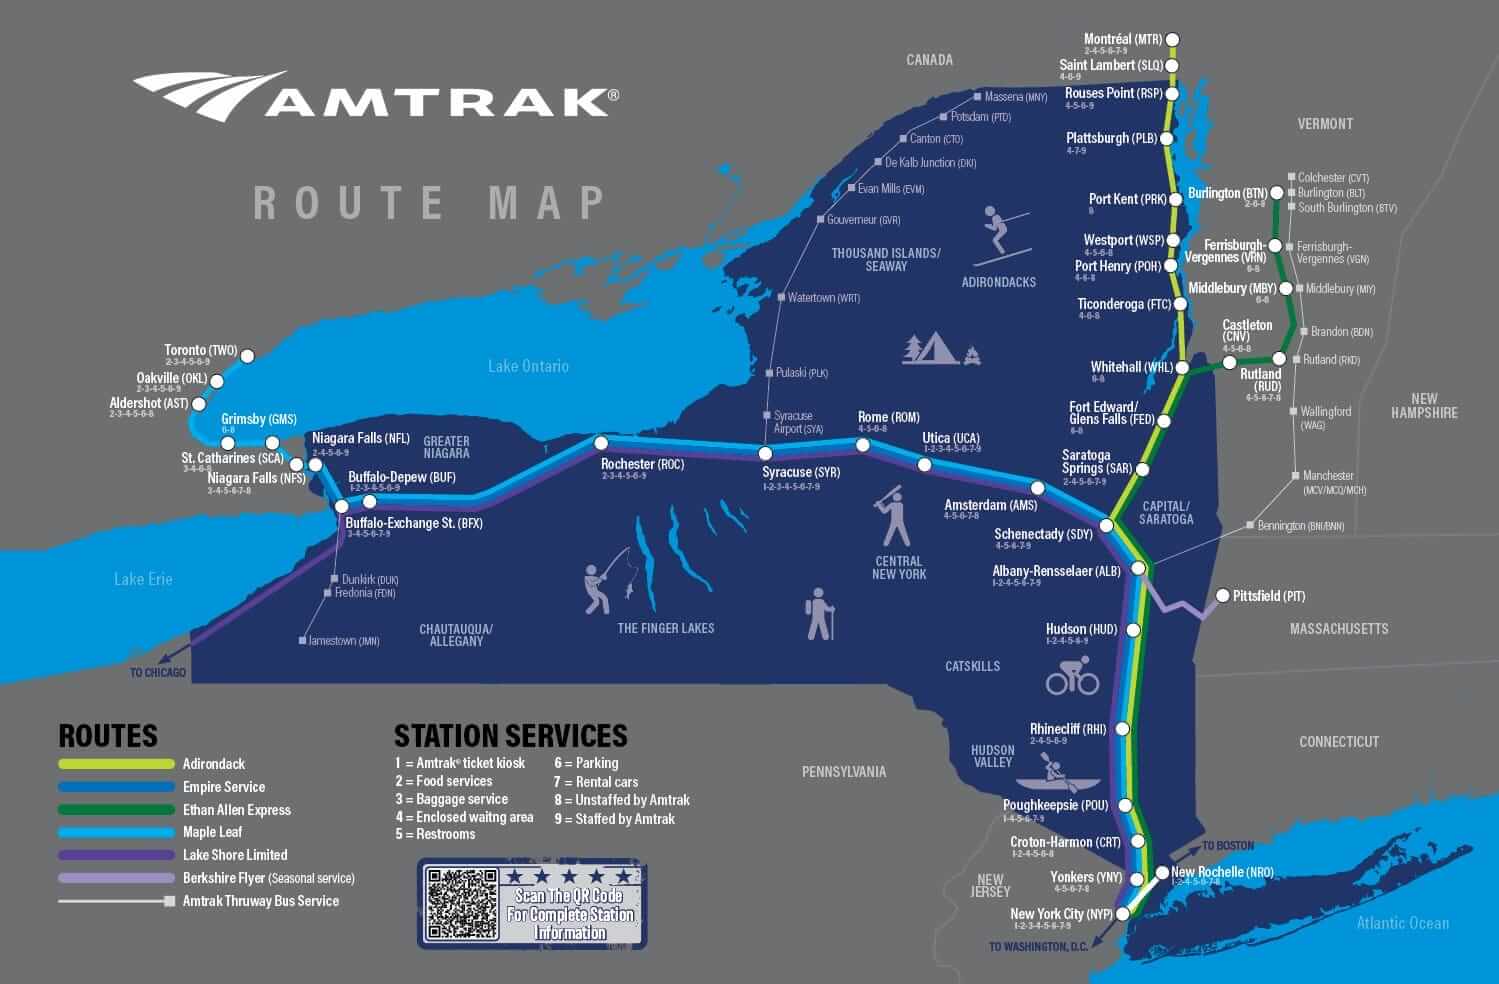 Amtrak Route Map in New York